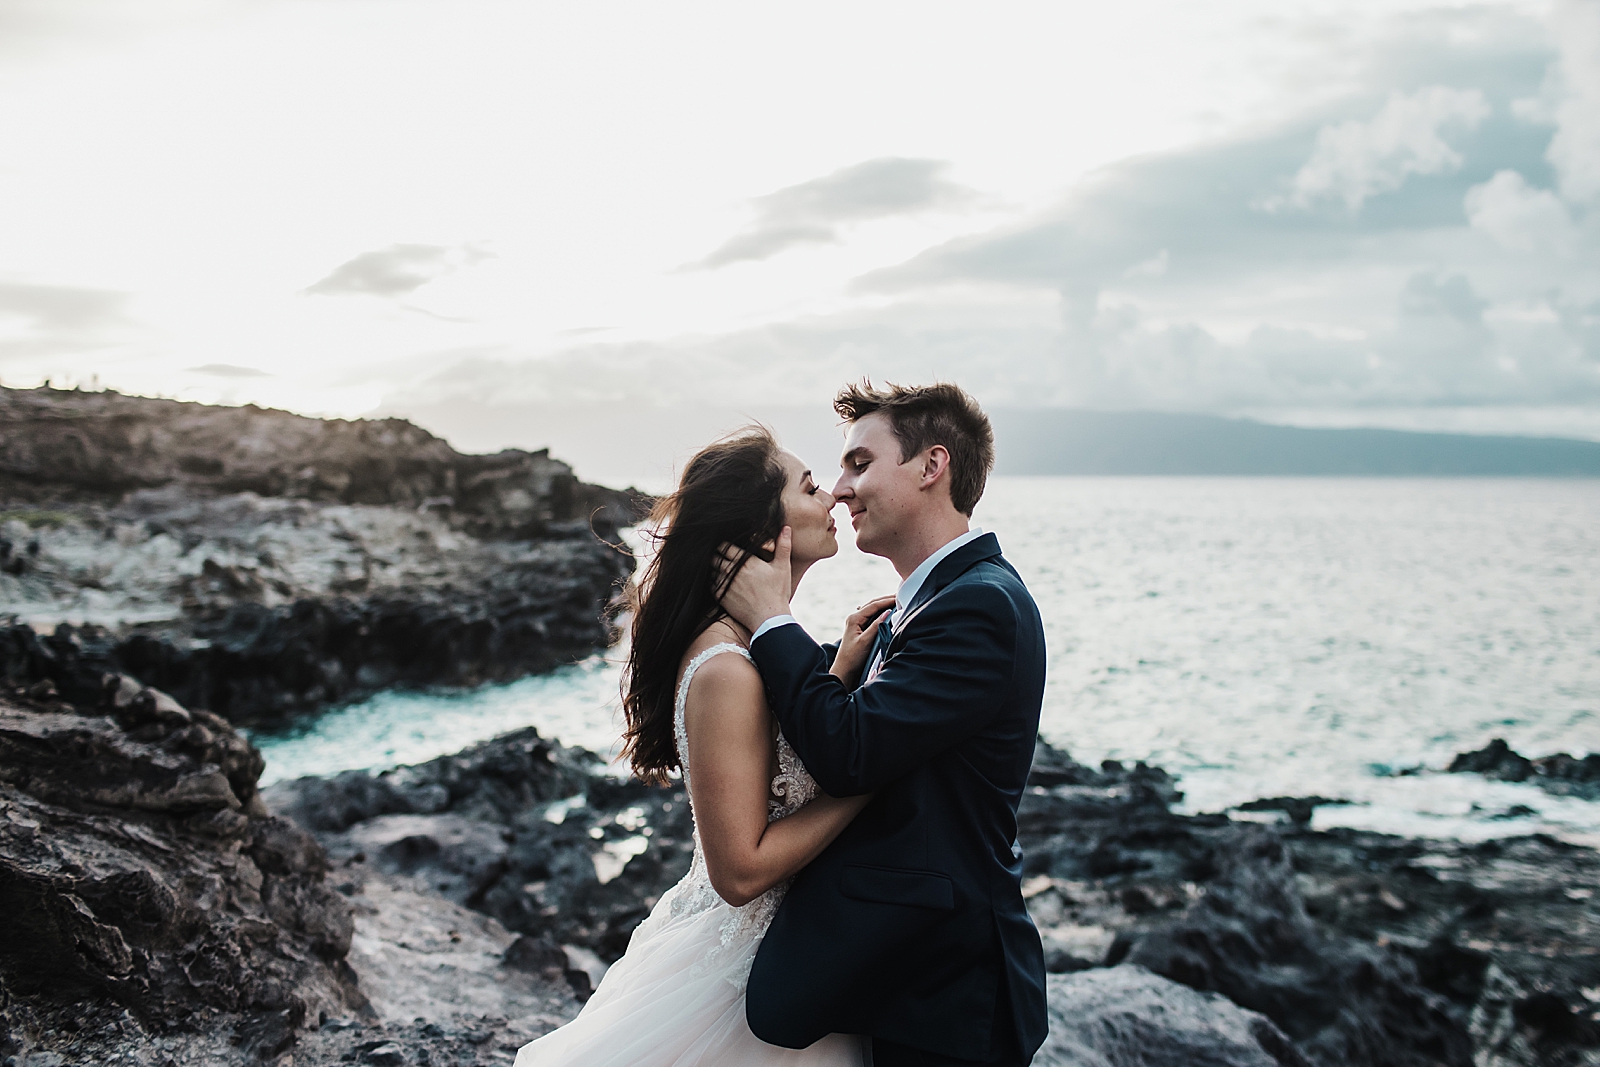 Bride and Groom kissing on rocky terrain next to ocean